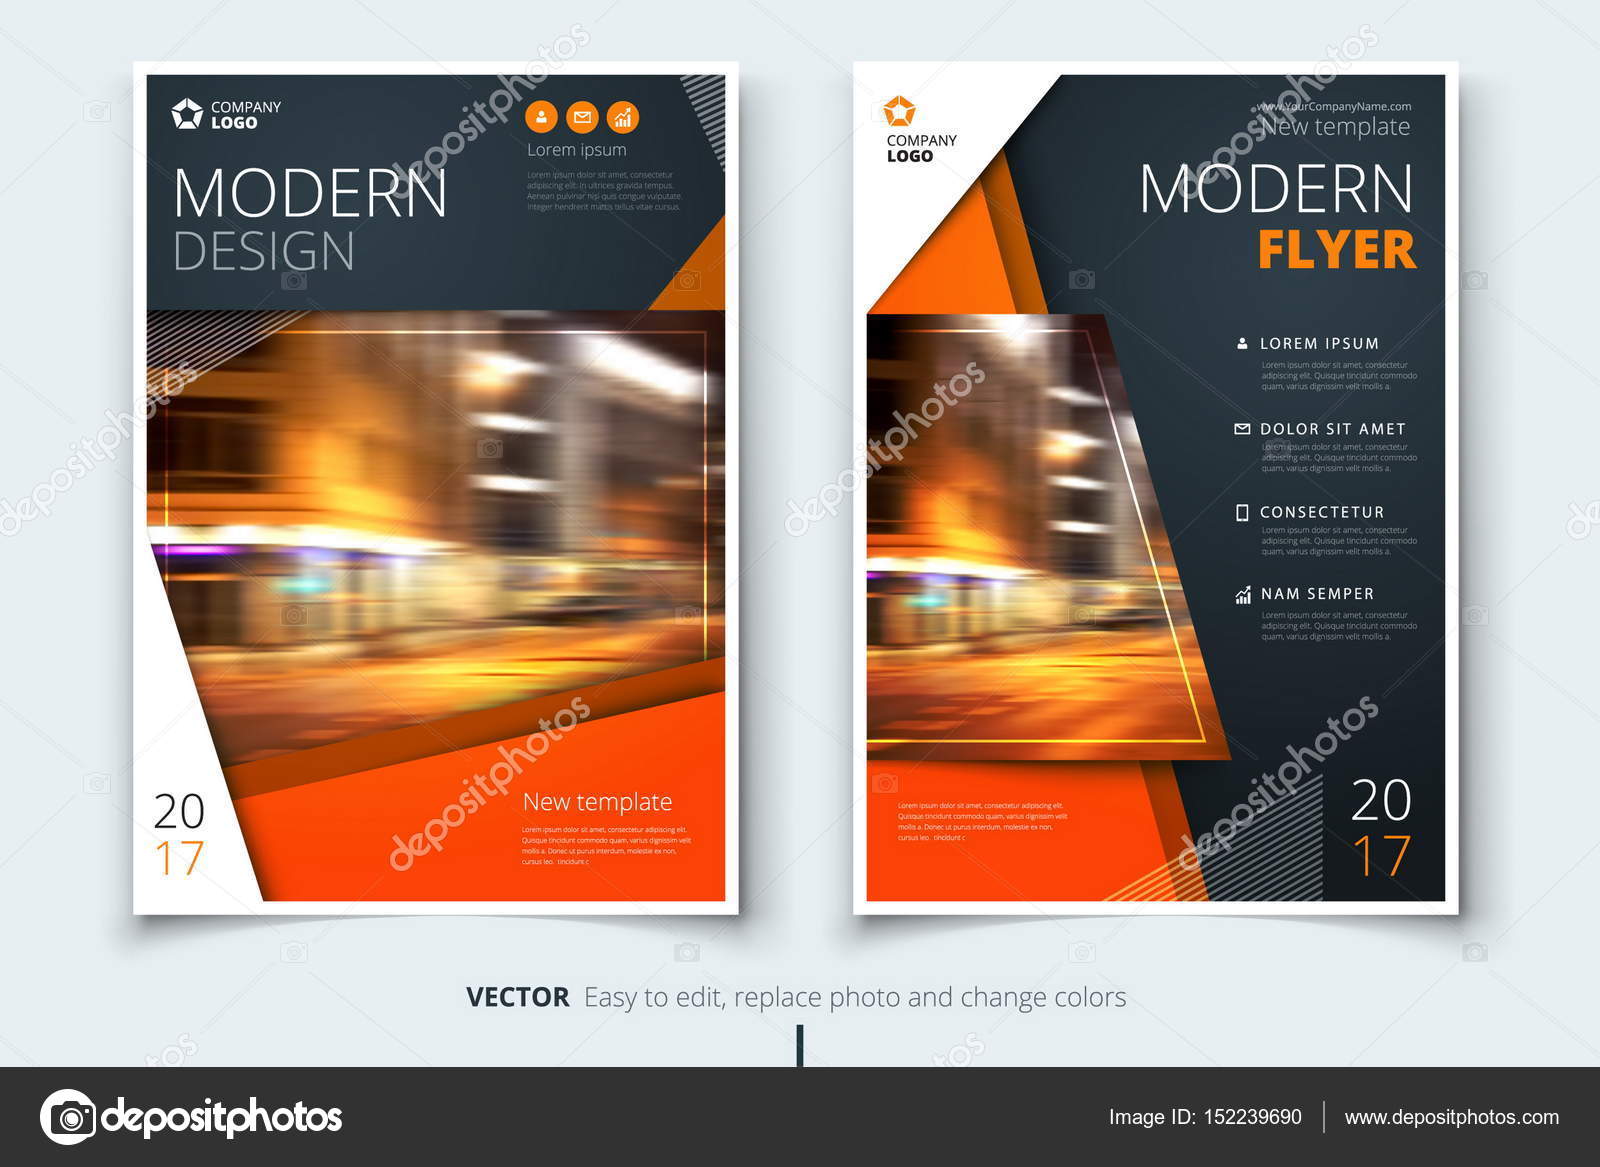 ᐈ Hotel Flyer Template Stock Images Royalty Free Flyer Design Hotel Pictures Download On Depositphotos